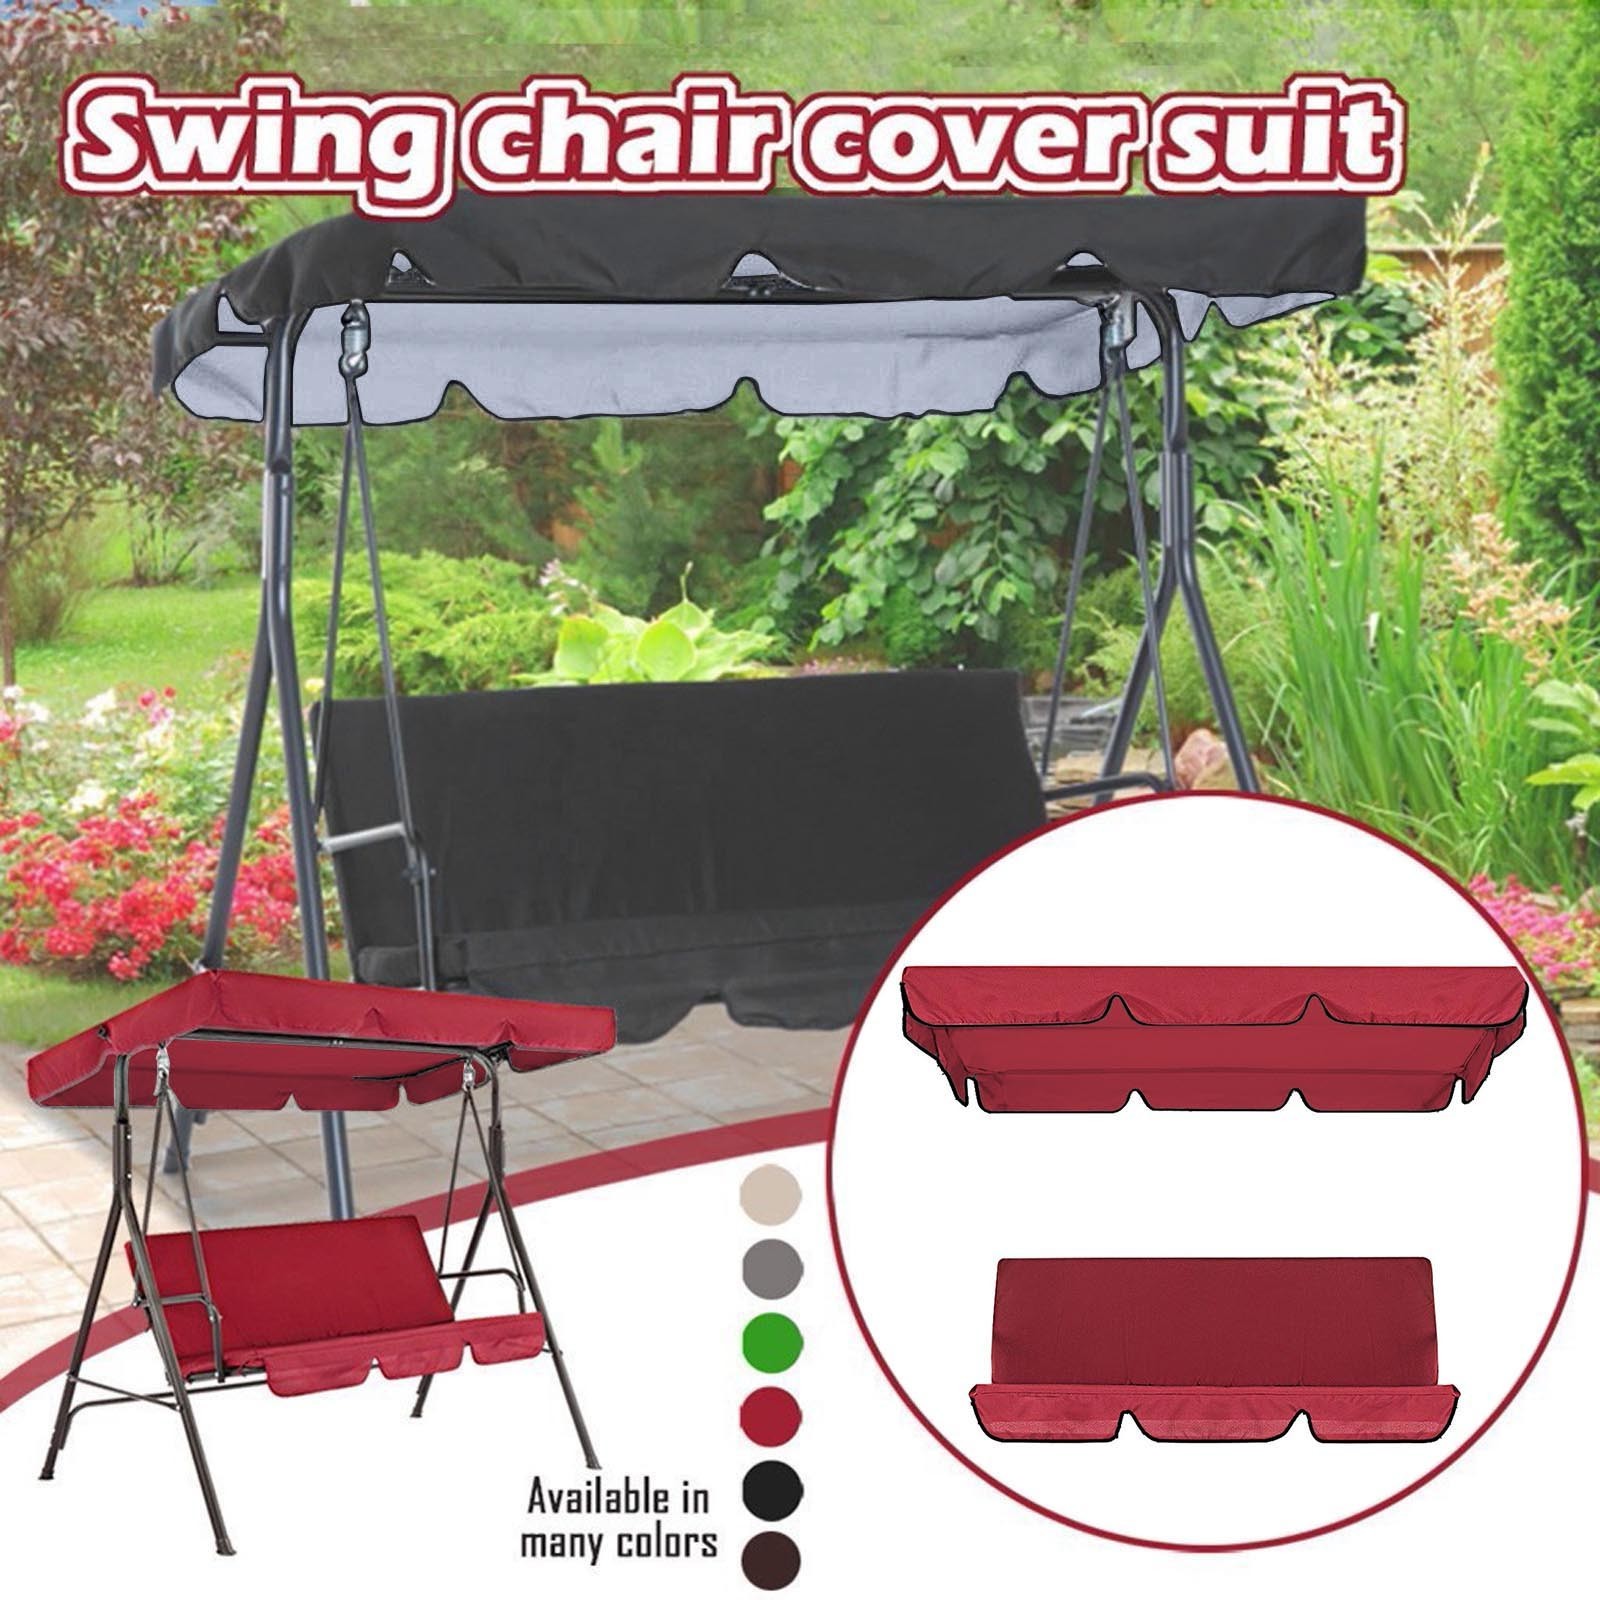 Wovilon Replacement Canopy, Swing Chair Canopy Replacement Swing Canopy Cover Waterproof Garden Swing Chair Canopy Cover for Outdoor Patio Garden Poolside Balcony - image 5 of 5